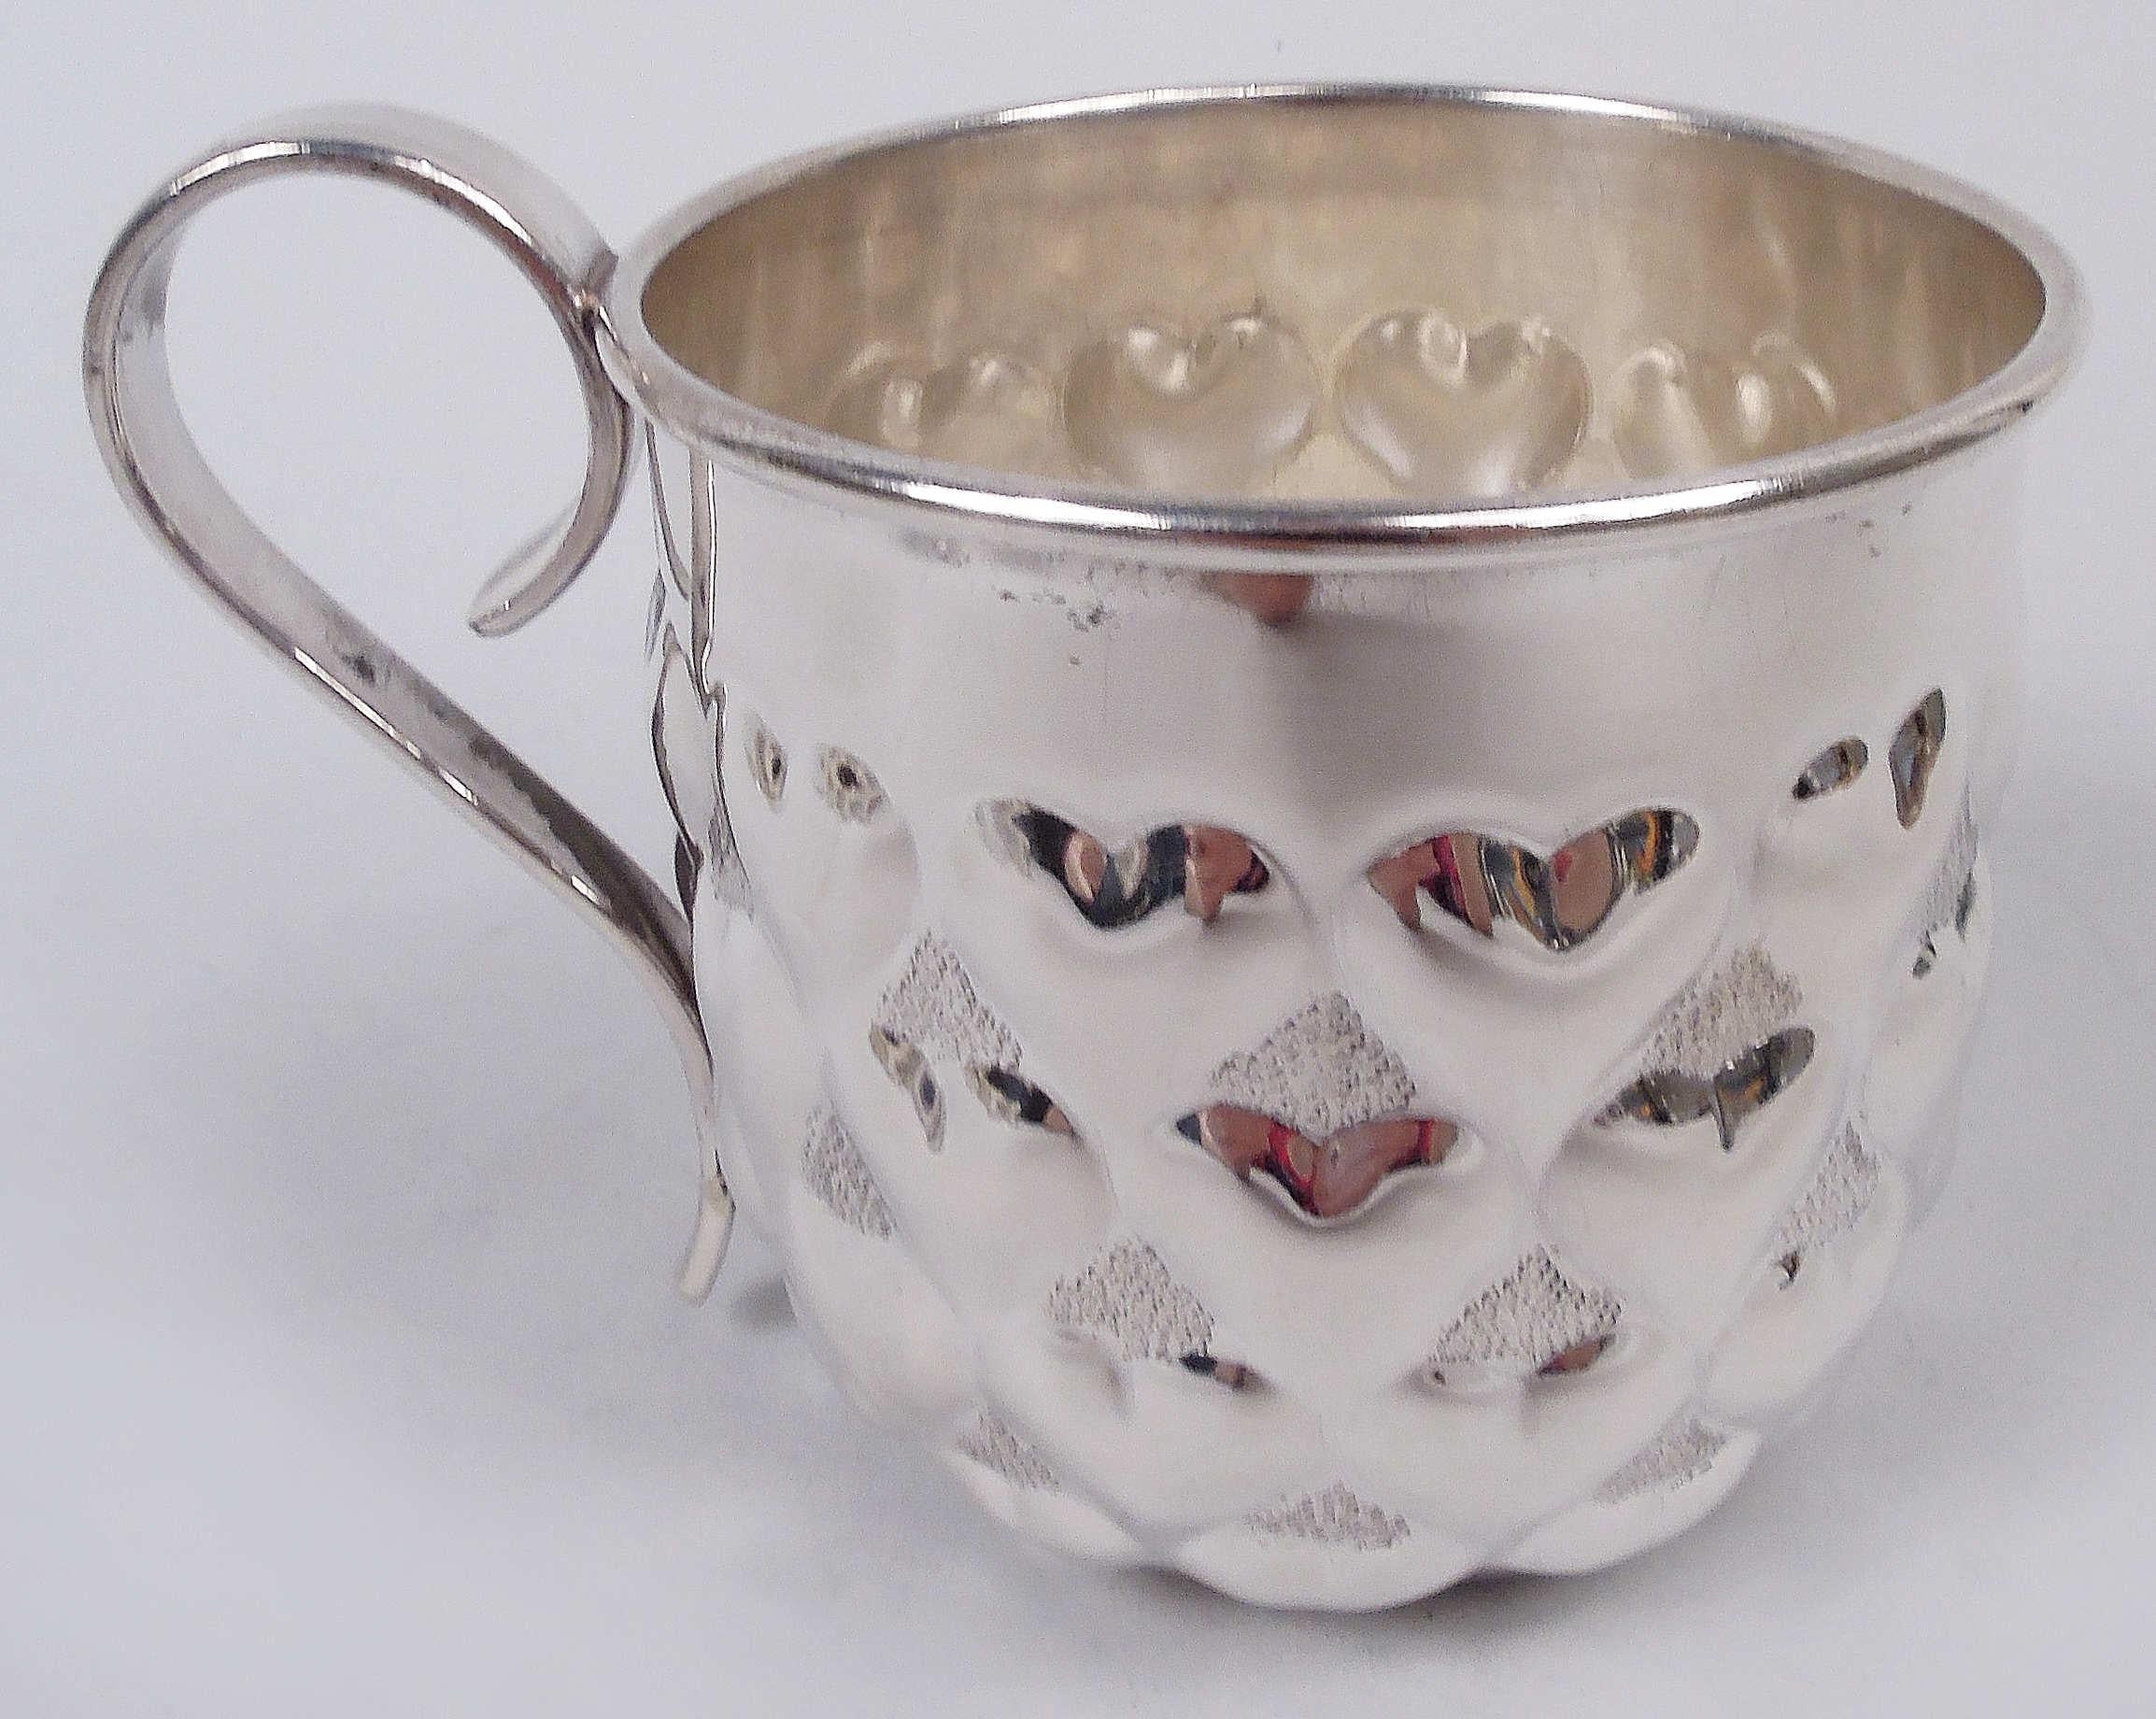 Italian Tiffany Modern Sterling Silver Baby Cup with Lovey-Dovey Hearts